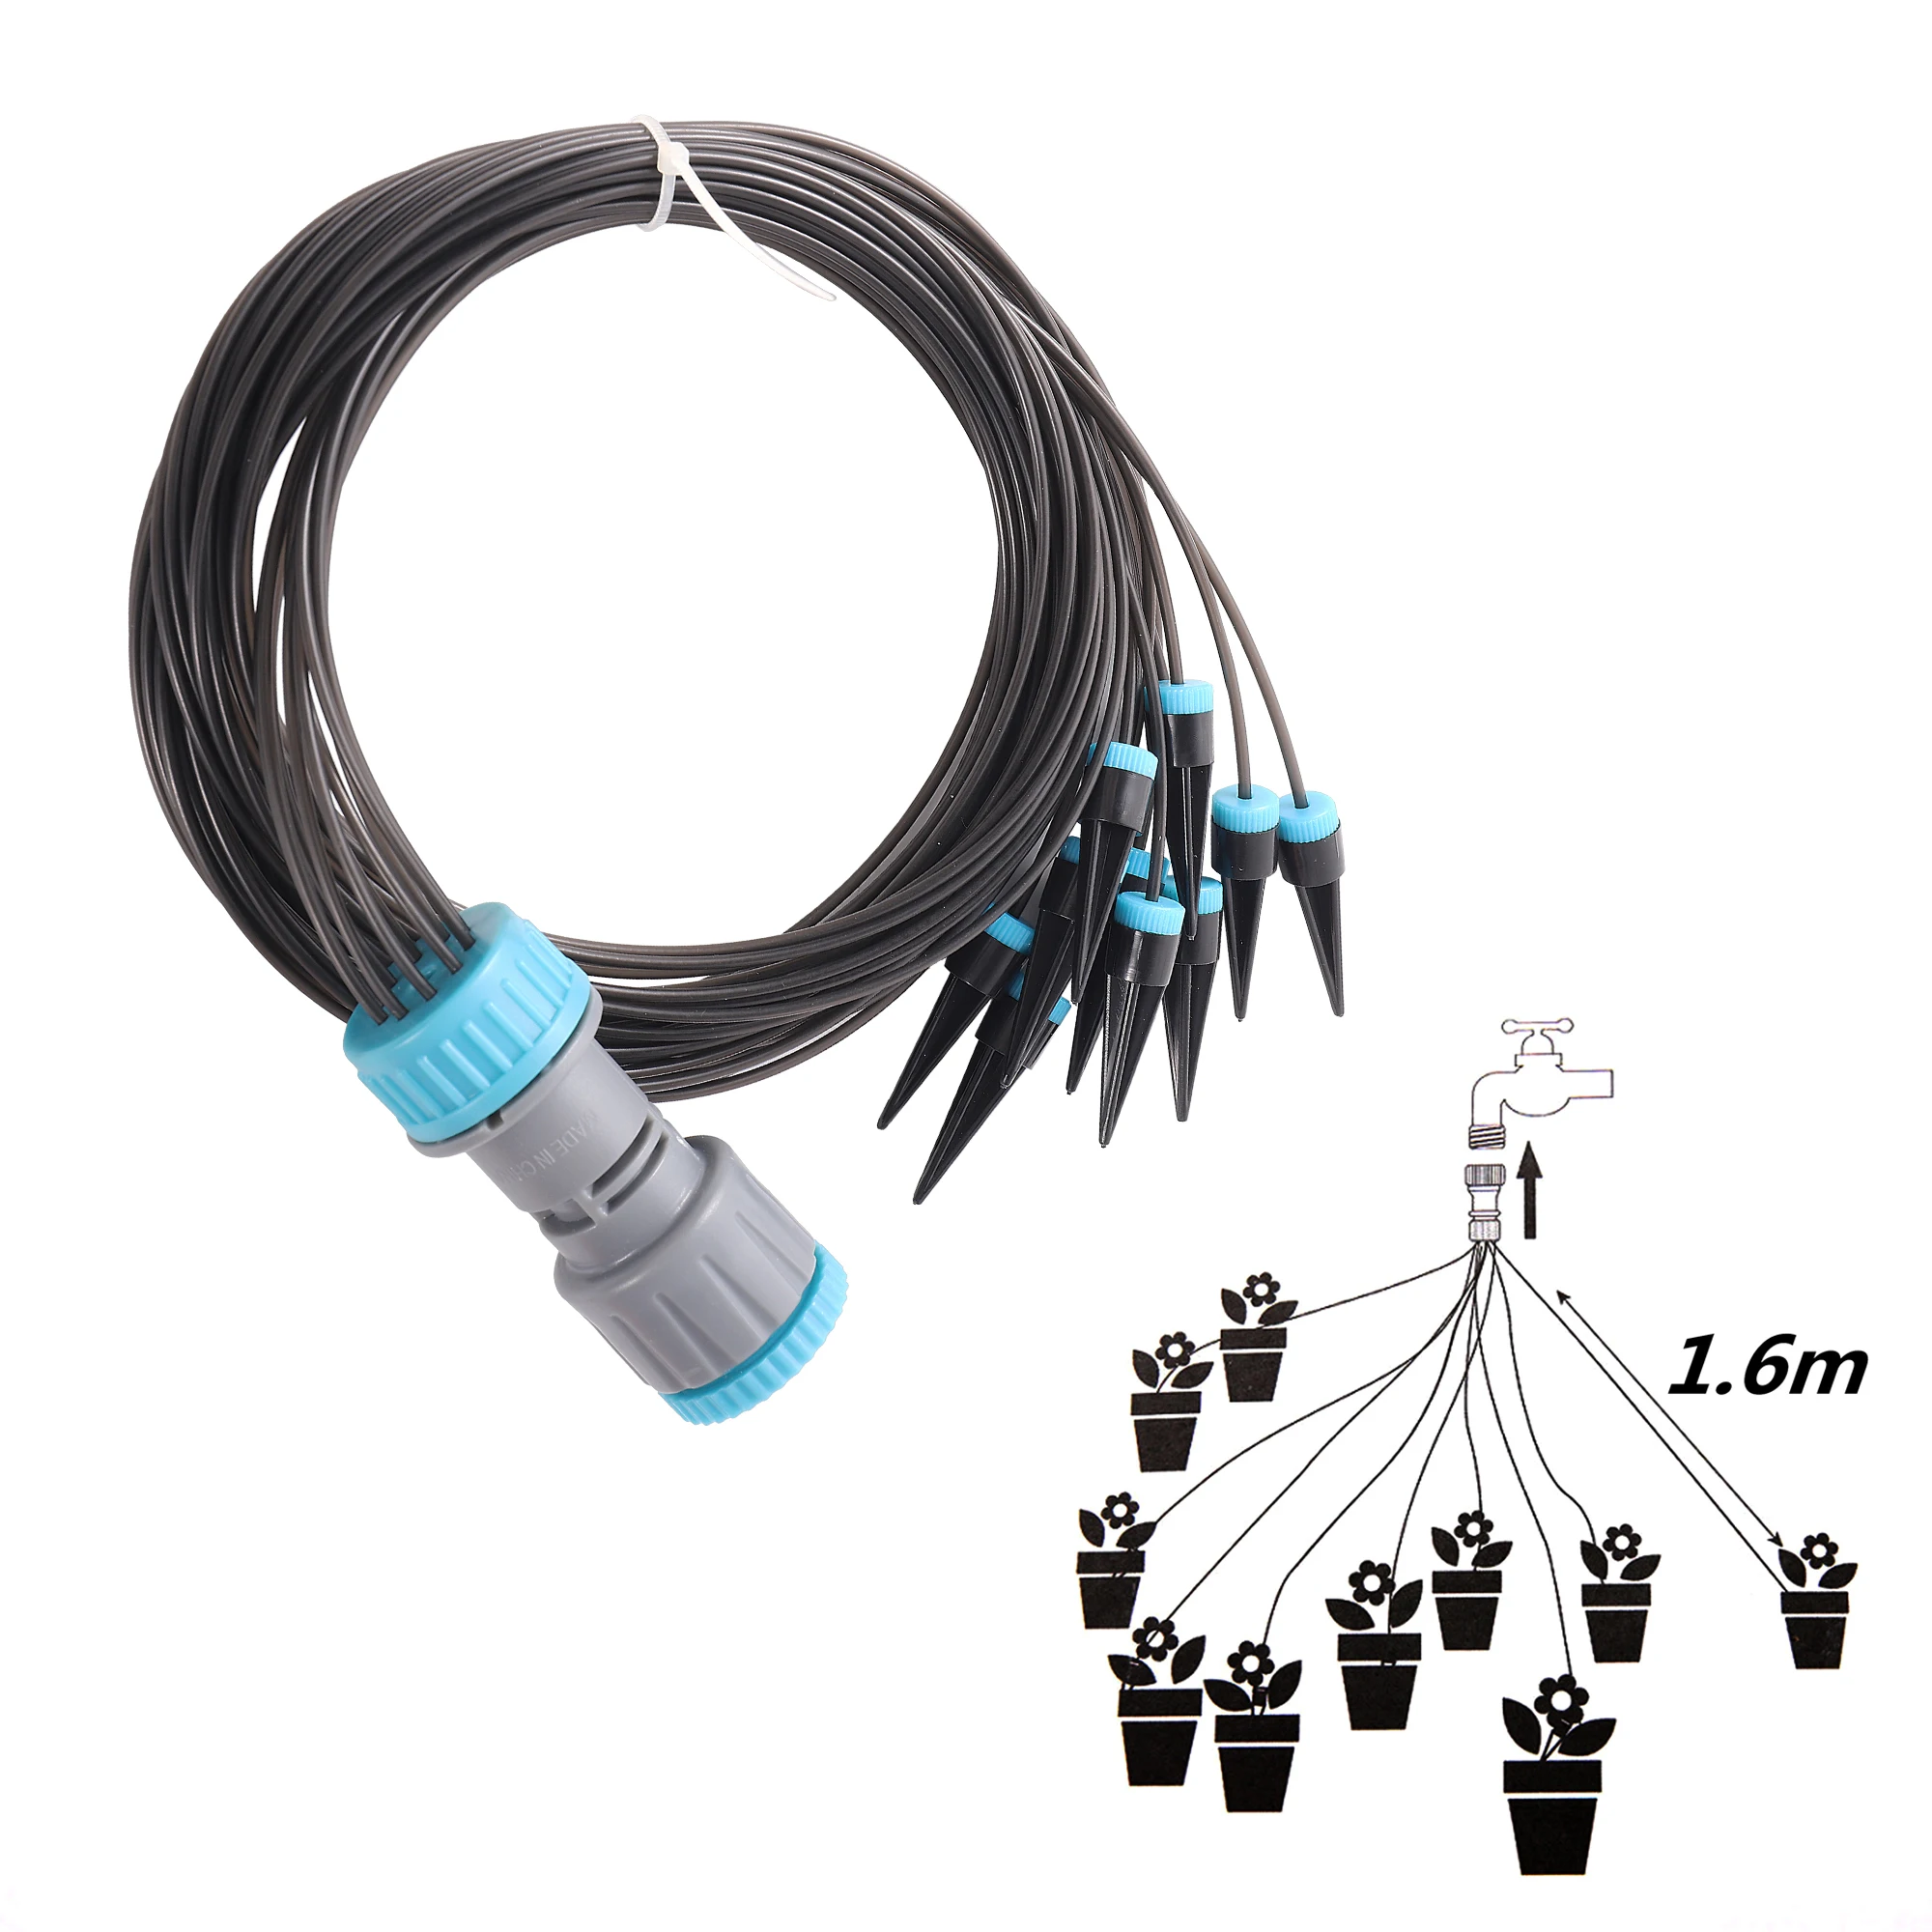 Drip Irrigation Kit Plant Watering System Adjustable Micro Irrigation Water-Saving System For Garden Greenhouse Pot Plants